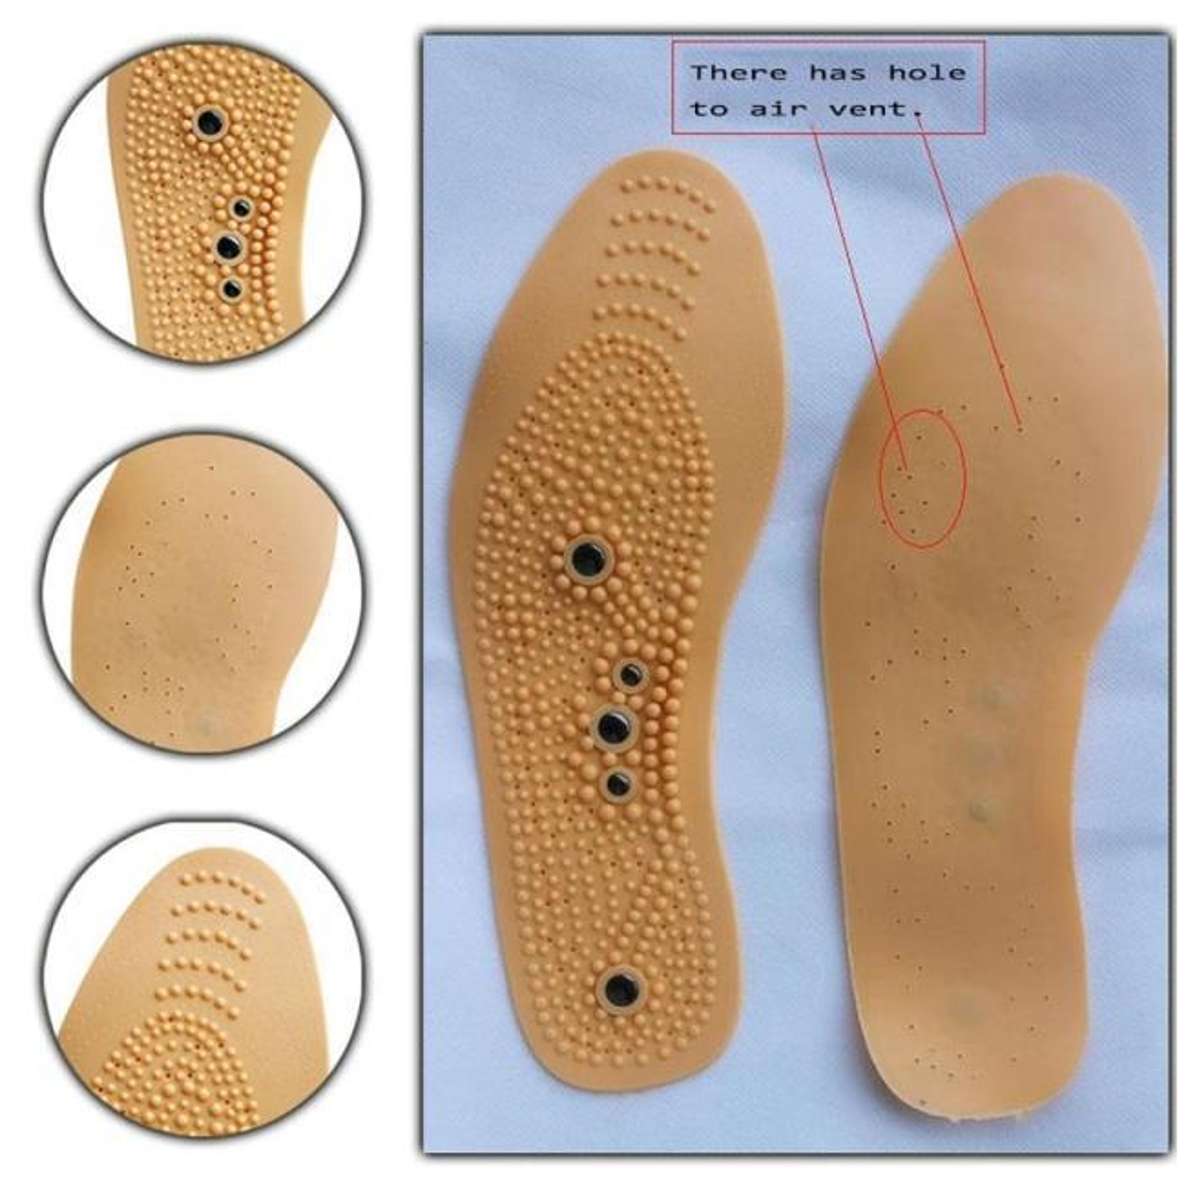 Acupressure-Magnetic-Massage-Insoles-Foot-Therapy-Reflexology-Pain-Relief-Shoe-Insole-1399043